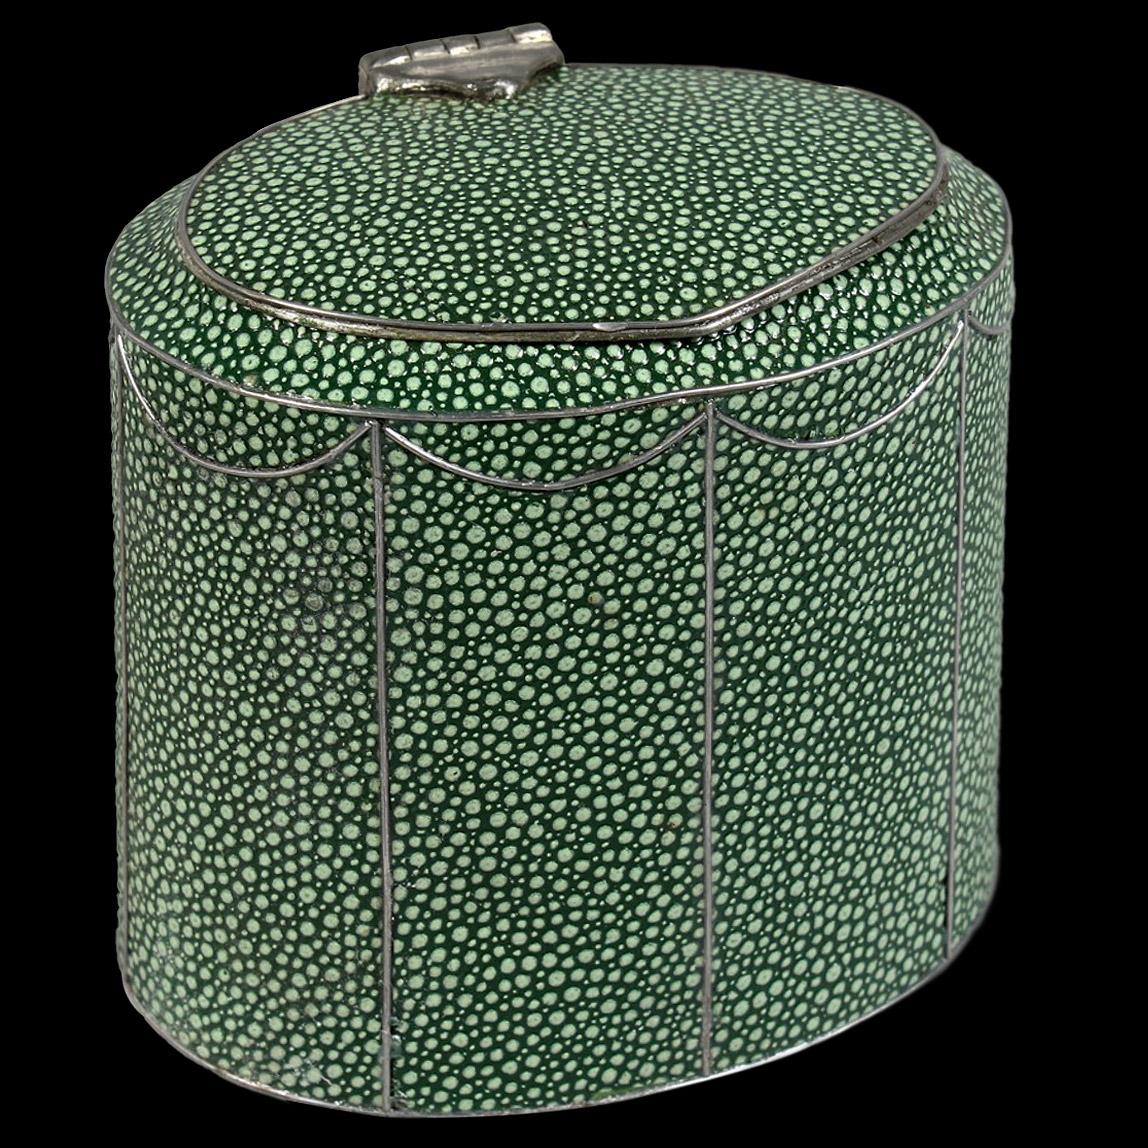 Georges III style lovely green shagreen oval-shaped tea caddy. Silver plated mount and oval hinged lid.
Perfect to store with refinement and elegance tea or other items.

Signed beneath 